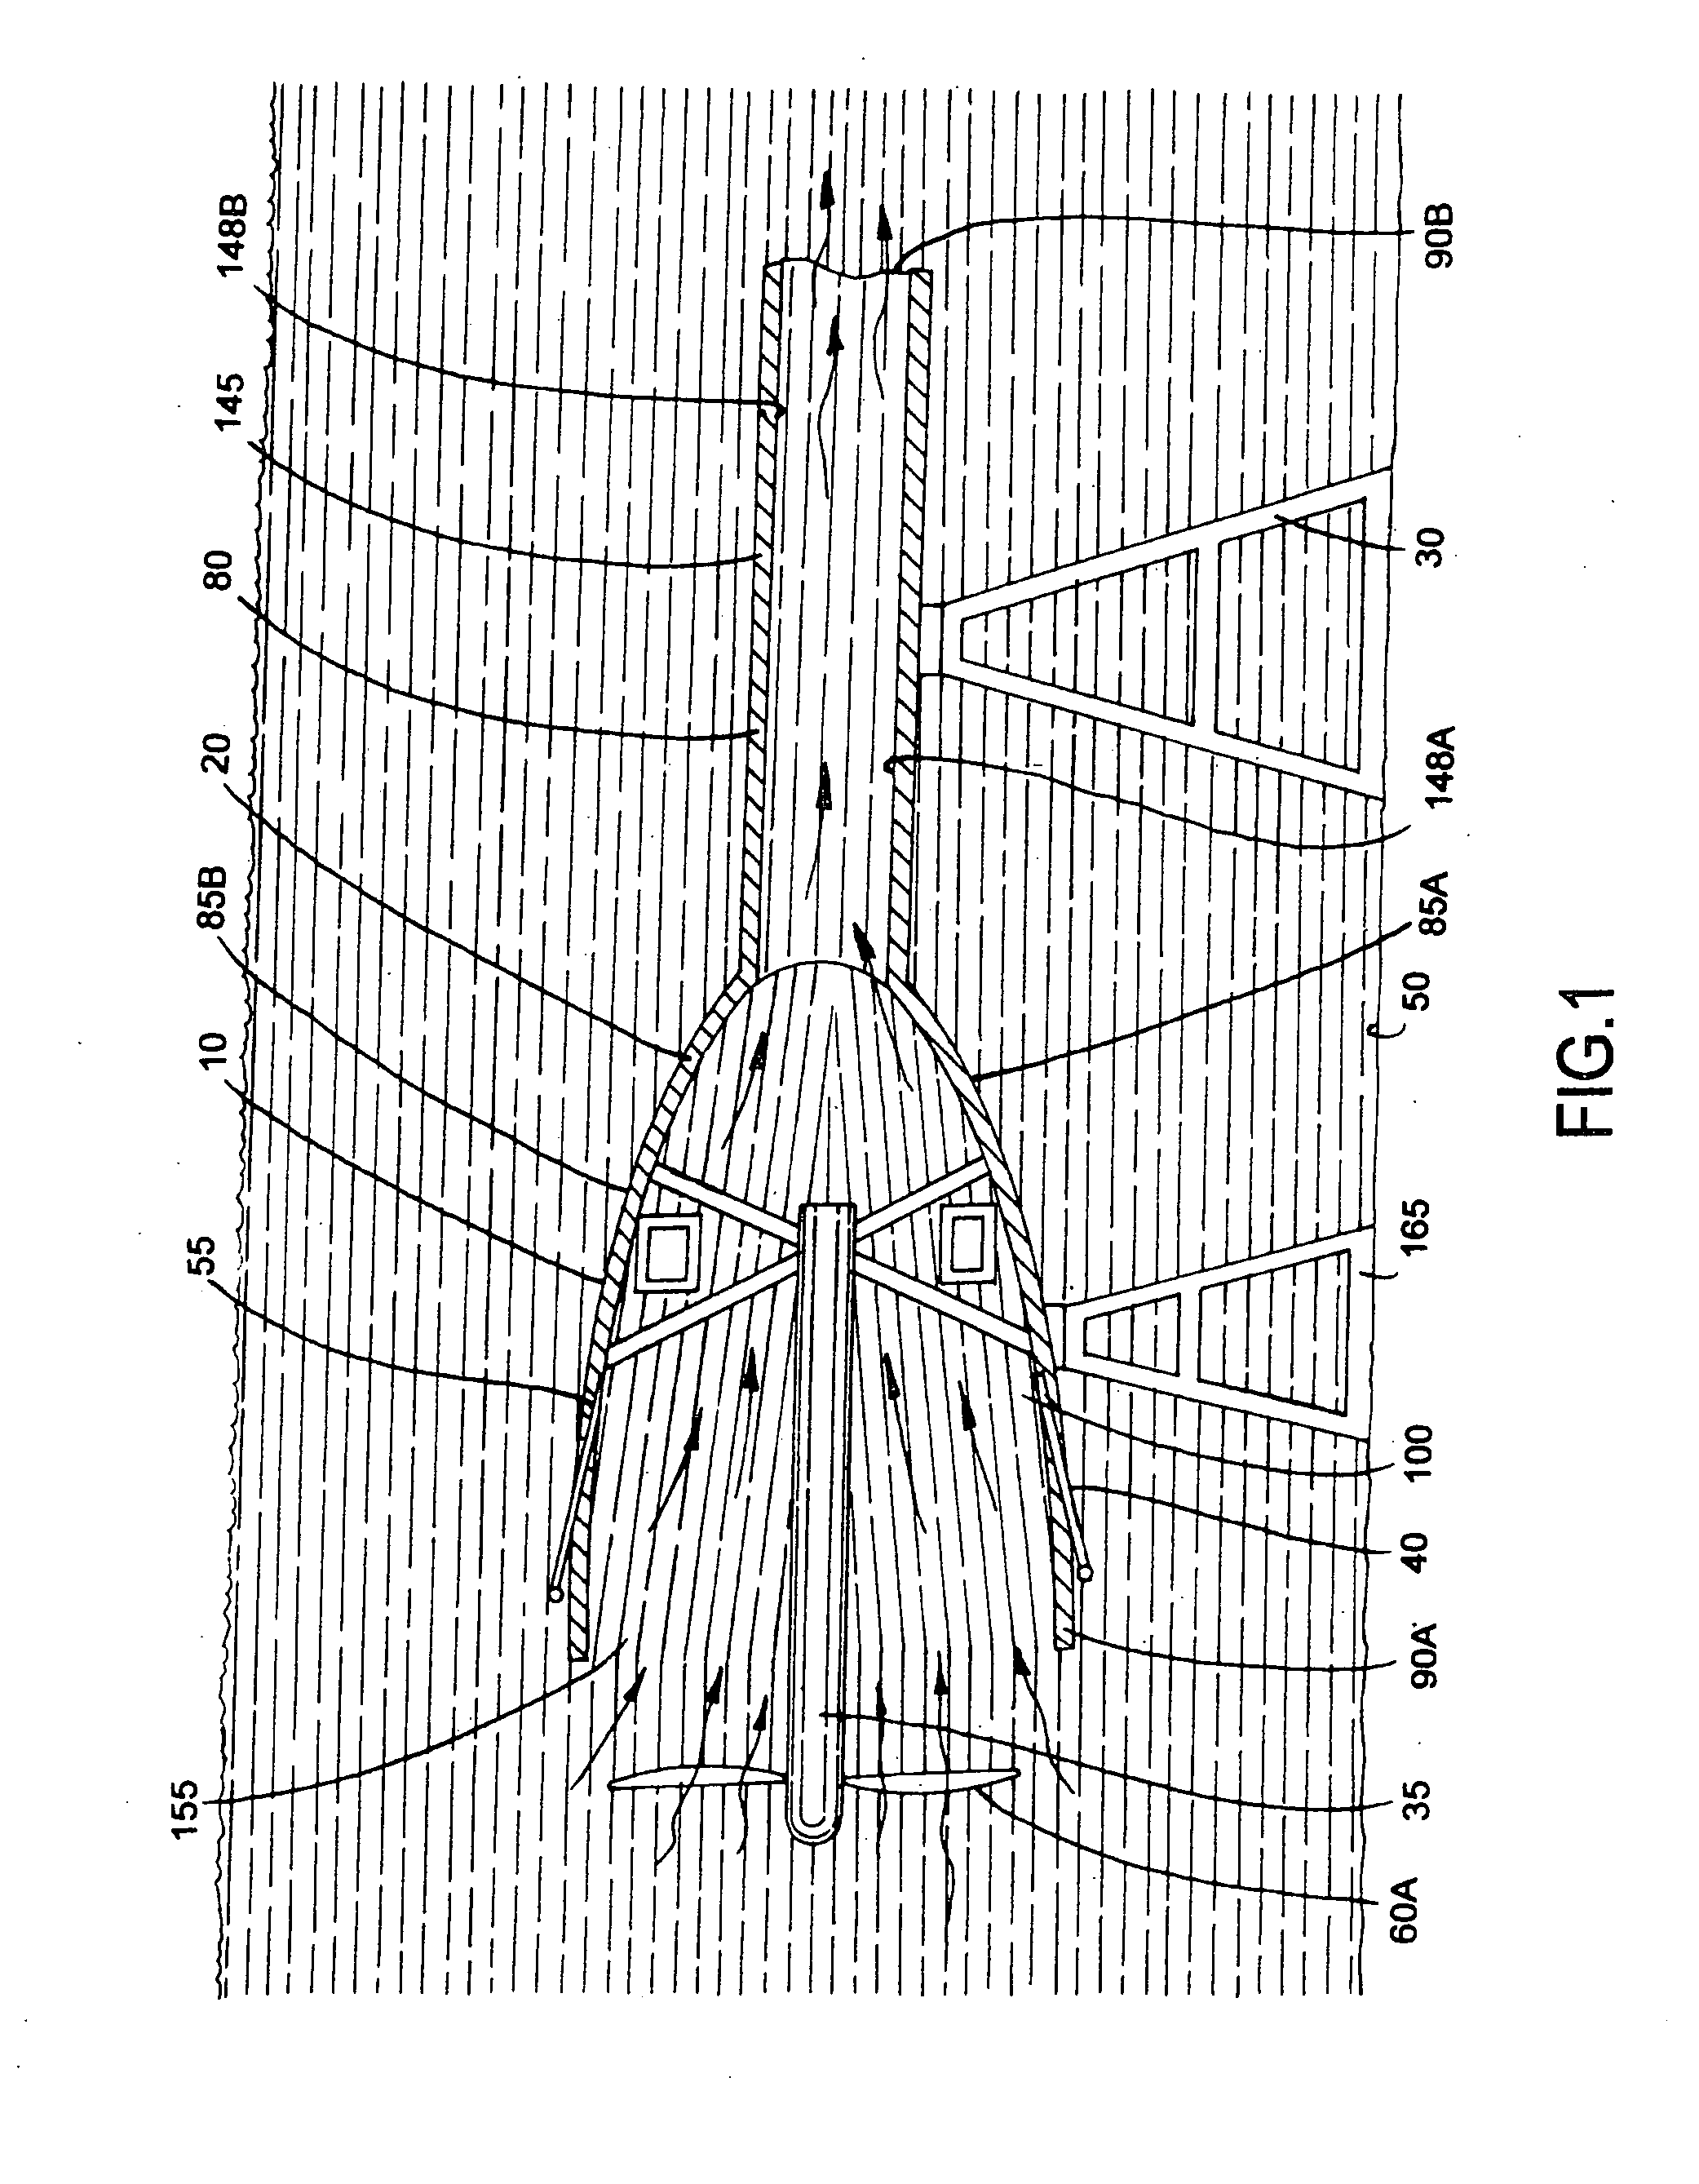 Water born rotor mechanism adapted for generating power